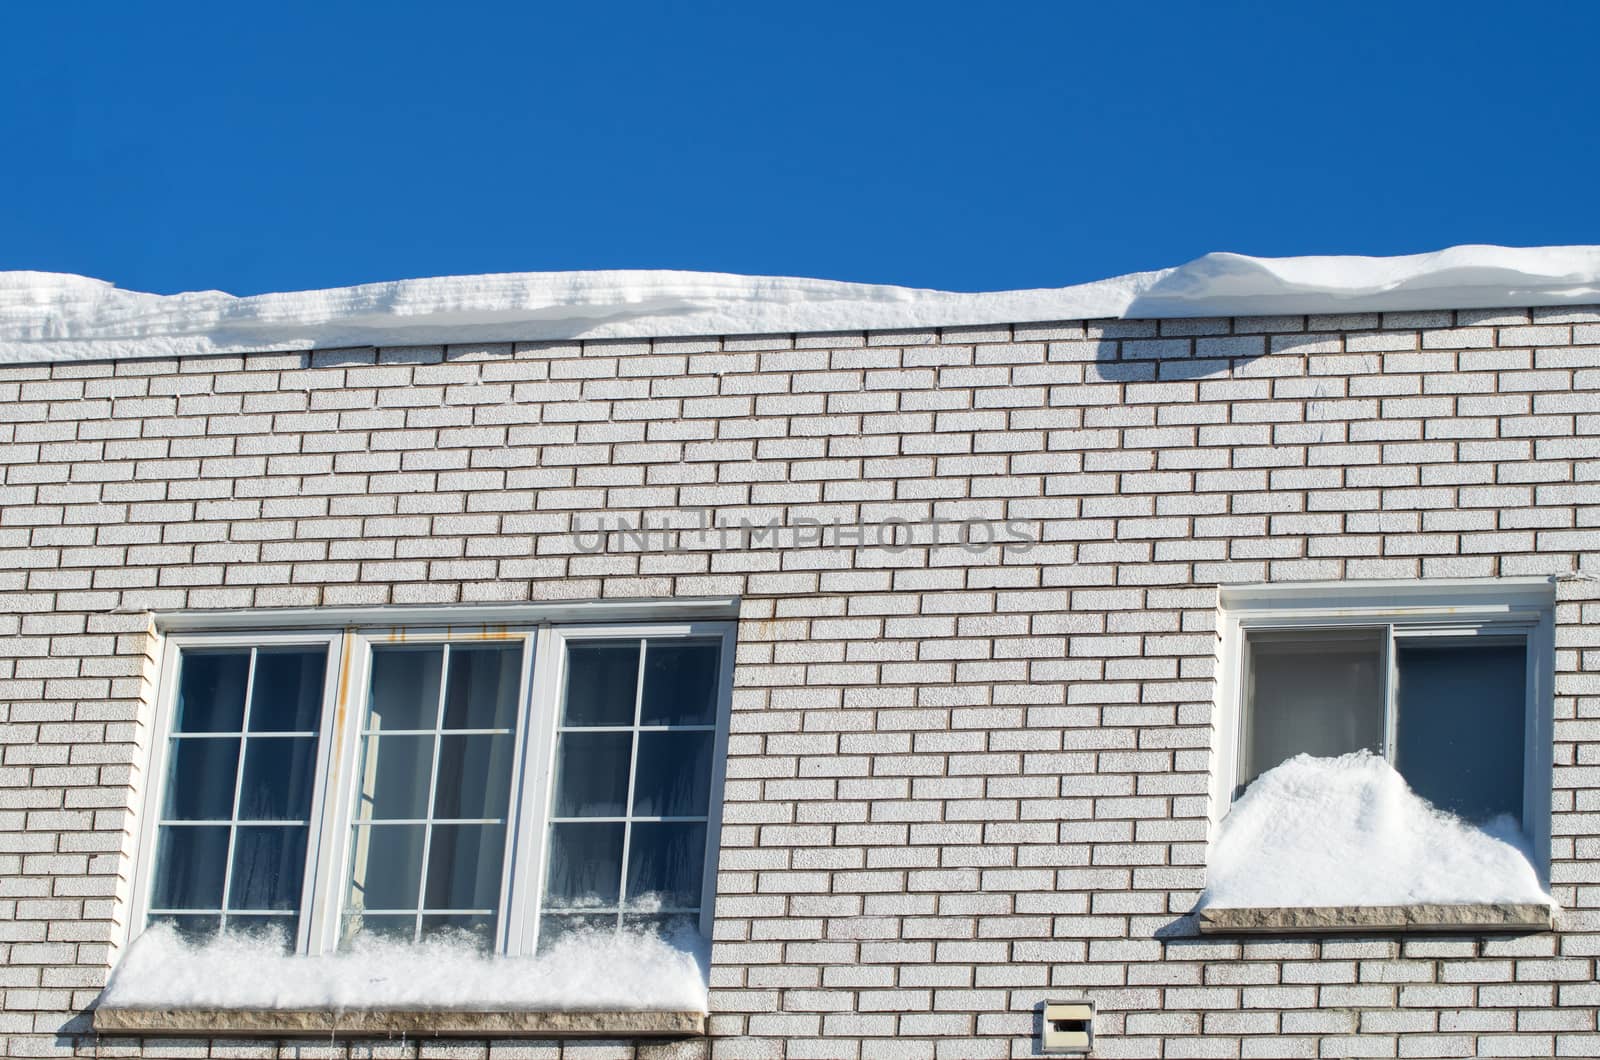 House with snow on roof and window during a sunny day in winter